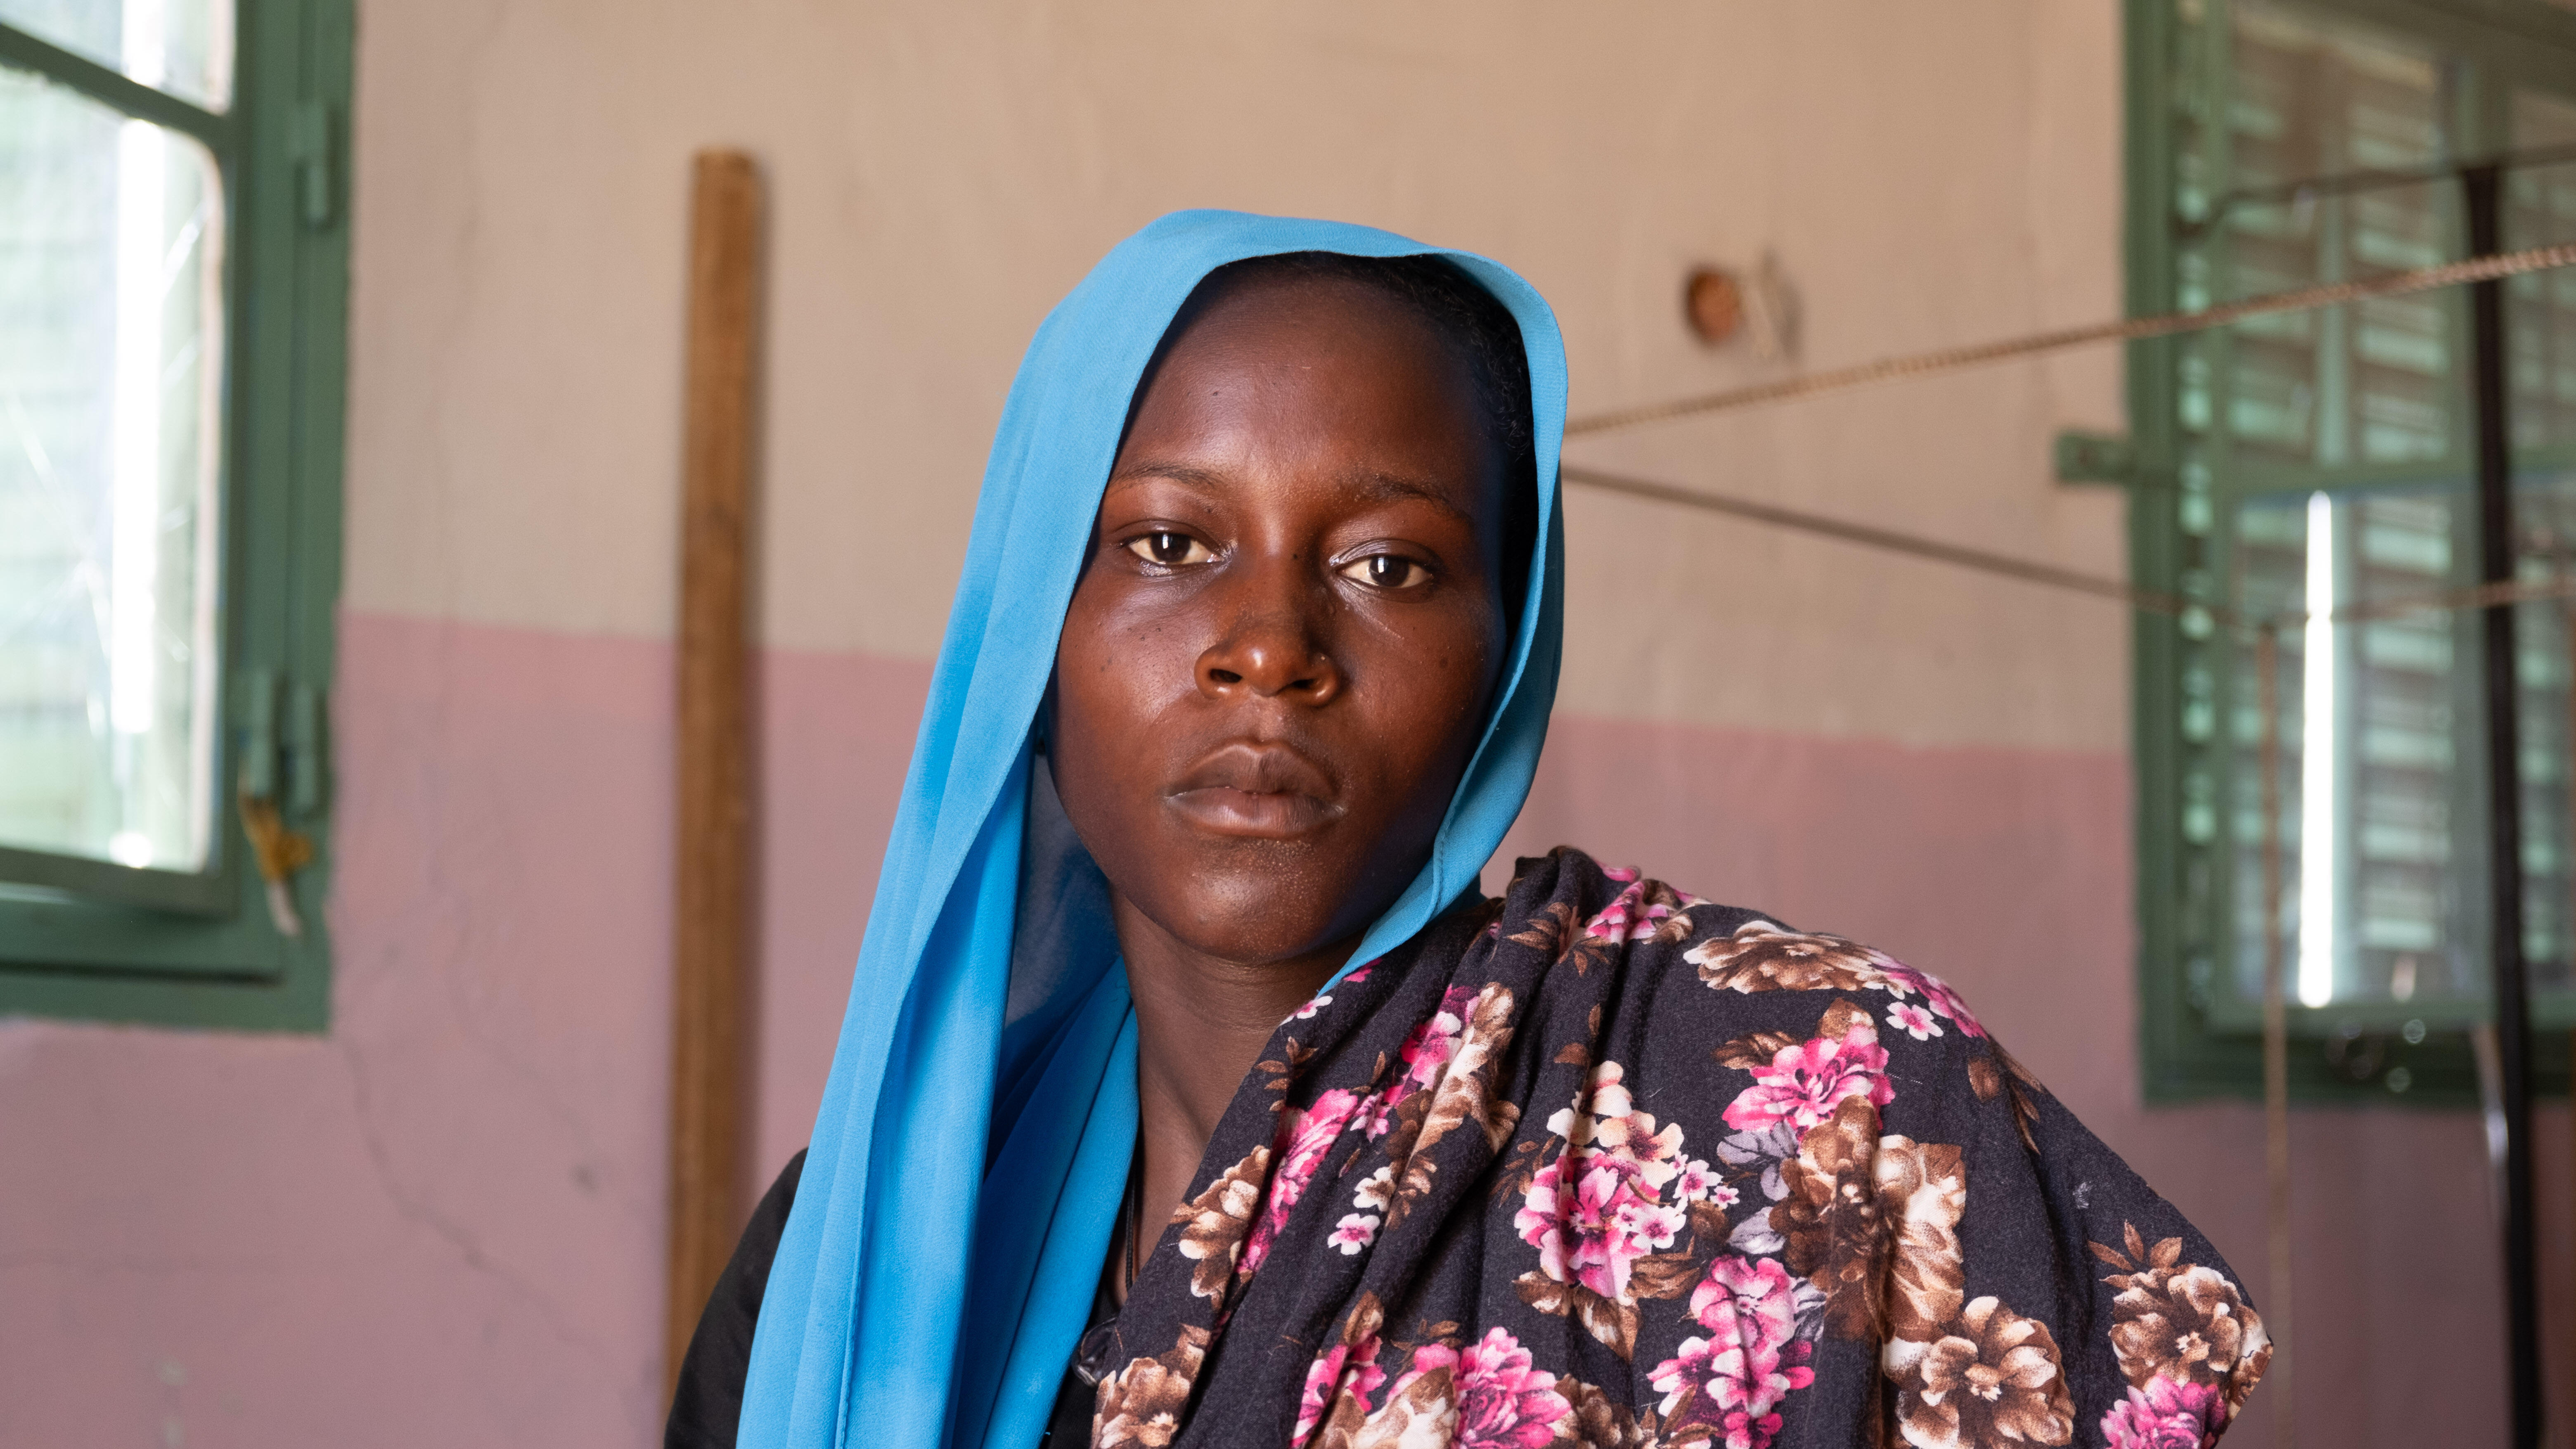 A women poses for a photo in a building in Chad.